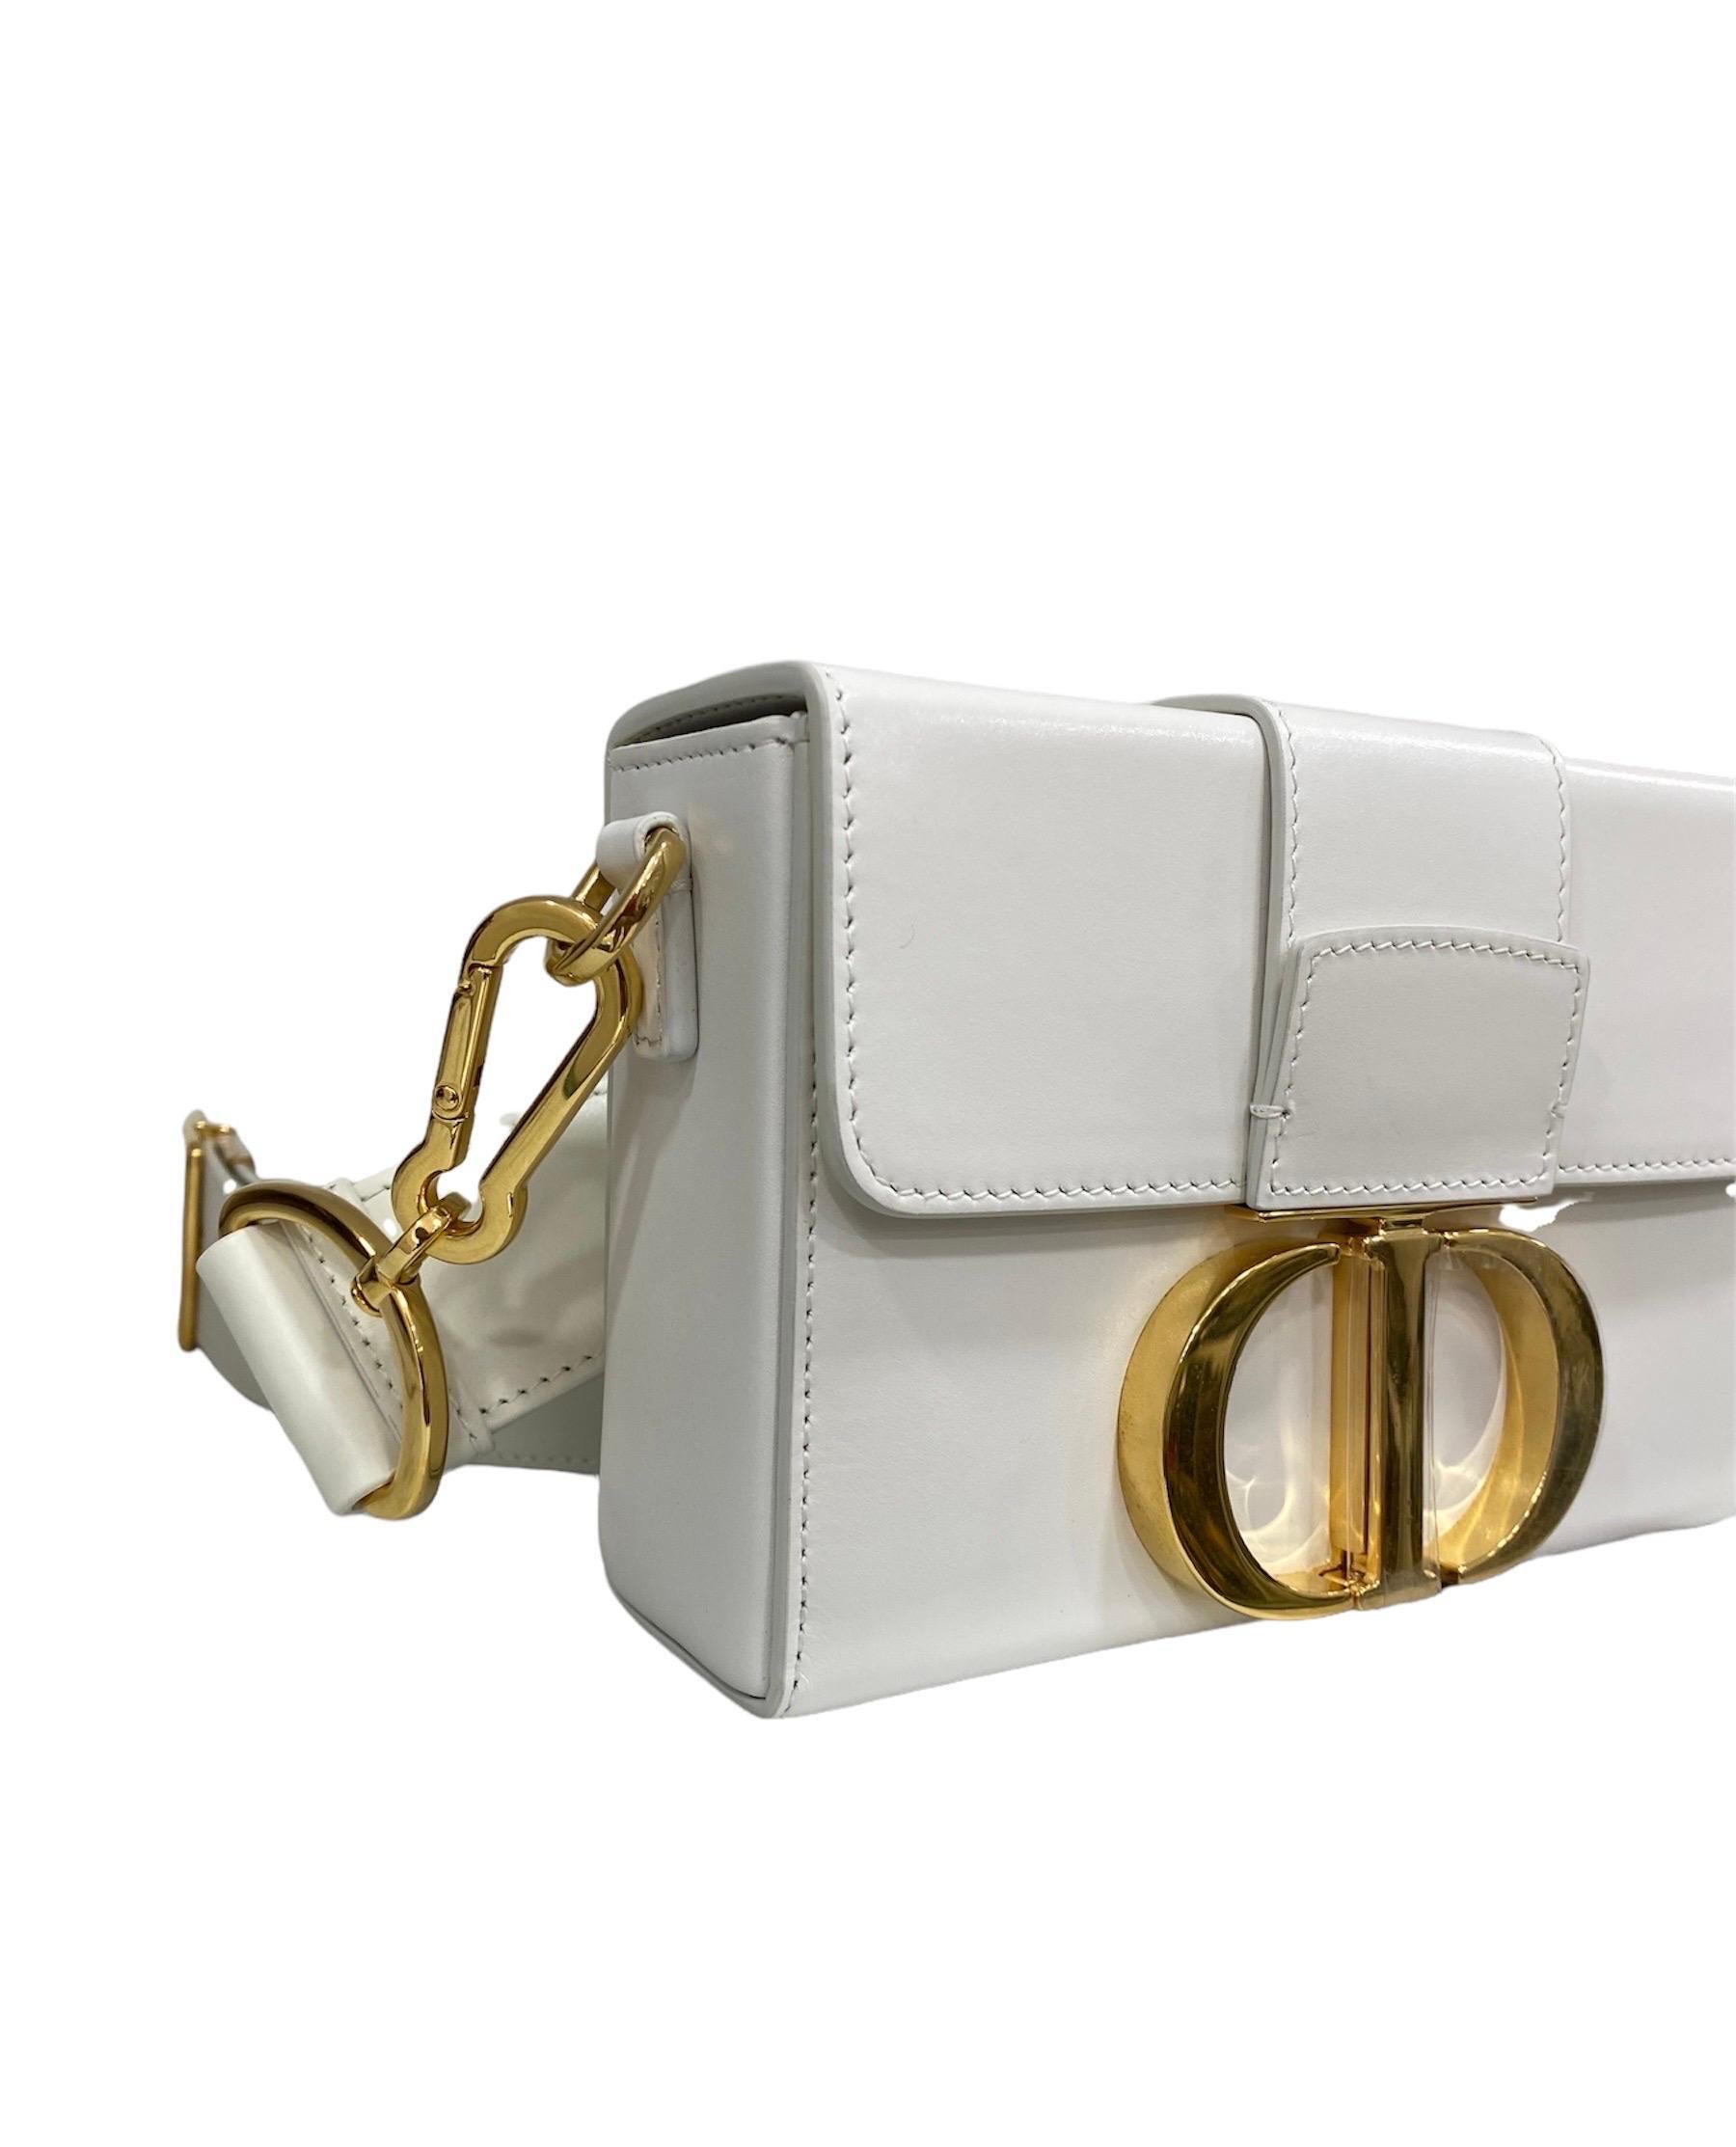 Dior signed bag, model 30 Montaigne Mini, made of white smooth leather with golden hardware.
Equipped with a flake closure with interlocking, internally covered in white leather, large for the essentials.
Equipped with a large shoulder strap in